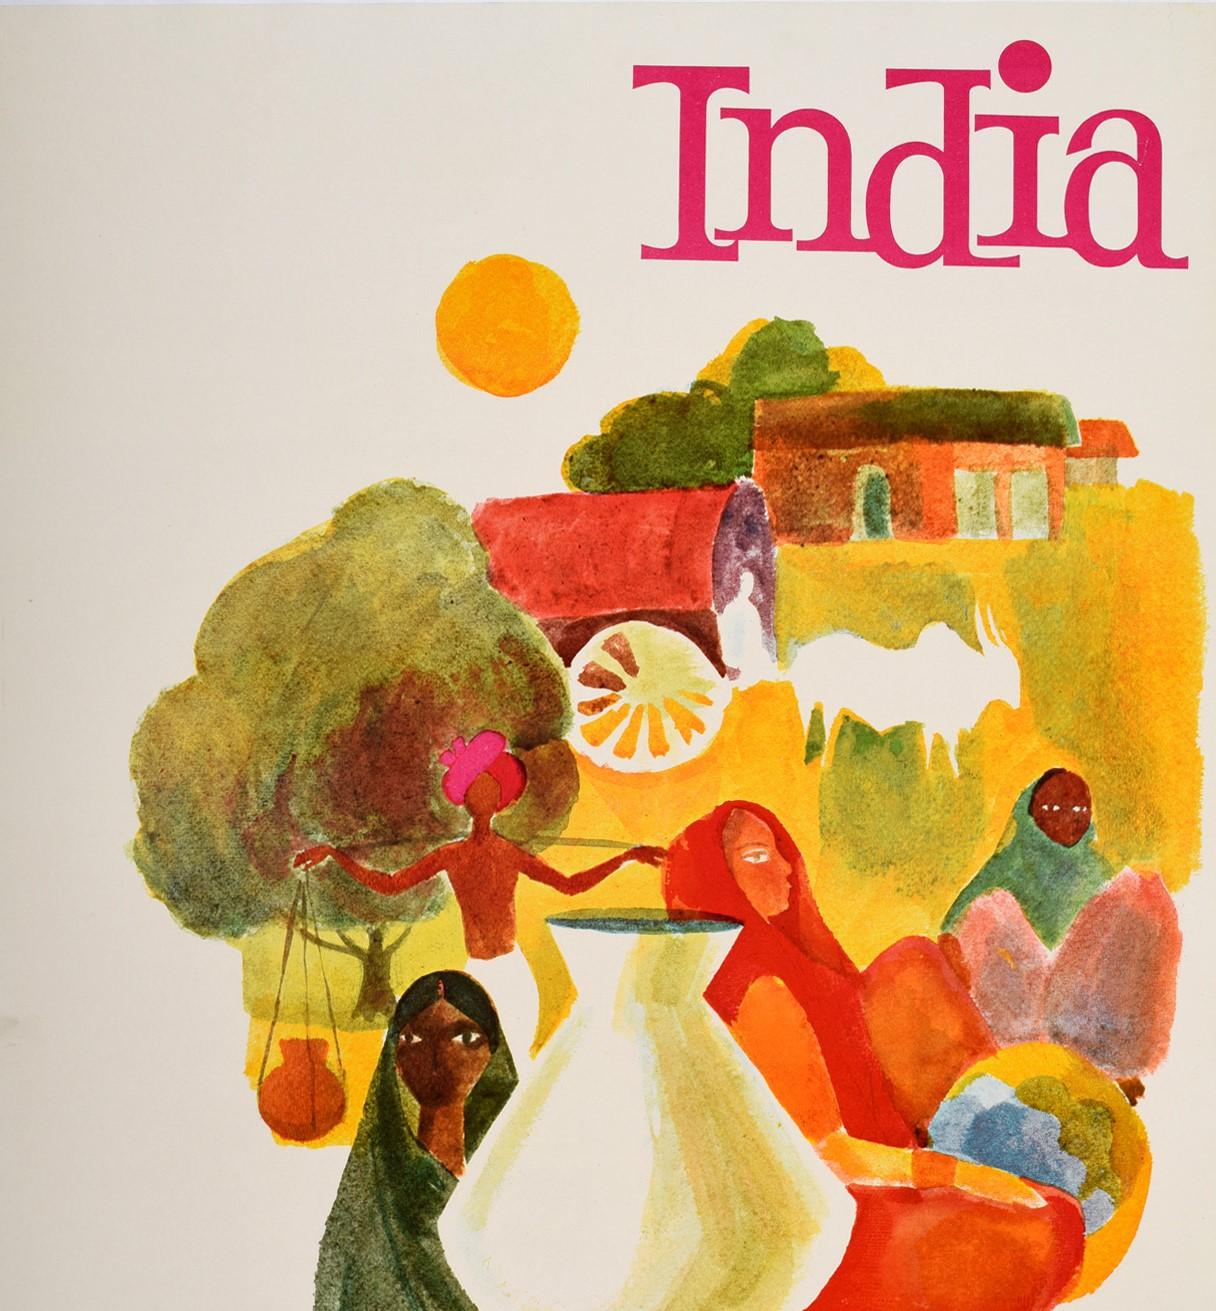 Original vintage travel poster for India featuring a colourful image of people in the countryside with a lady wearing a traditional colourful dress carrying a pot on her head in front of a cow lying down and more people behind her, a cart passing